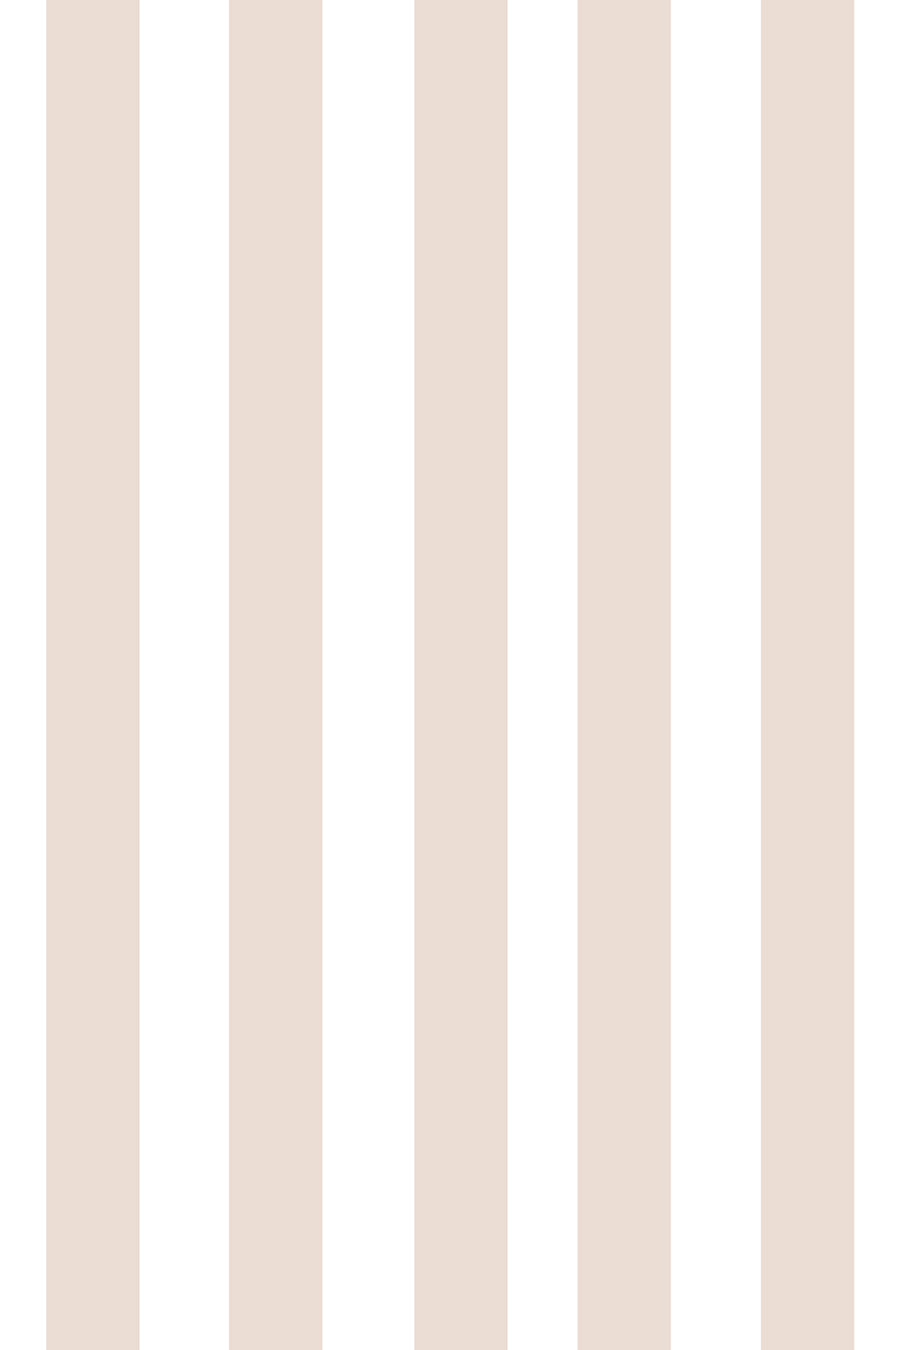 Woolf With Me Fitted Crib Sheet Stripes color_coconut